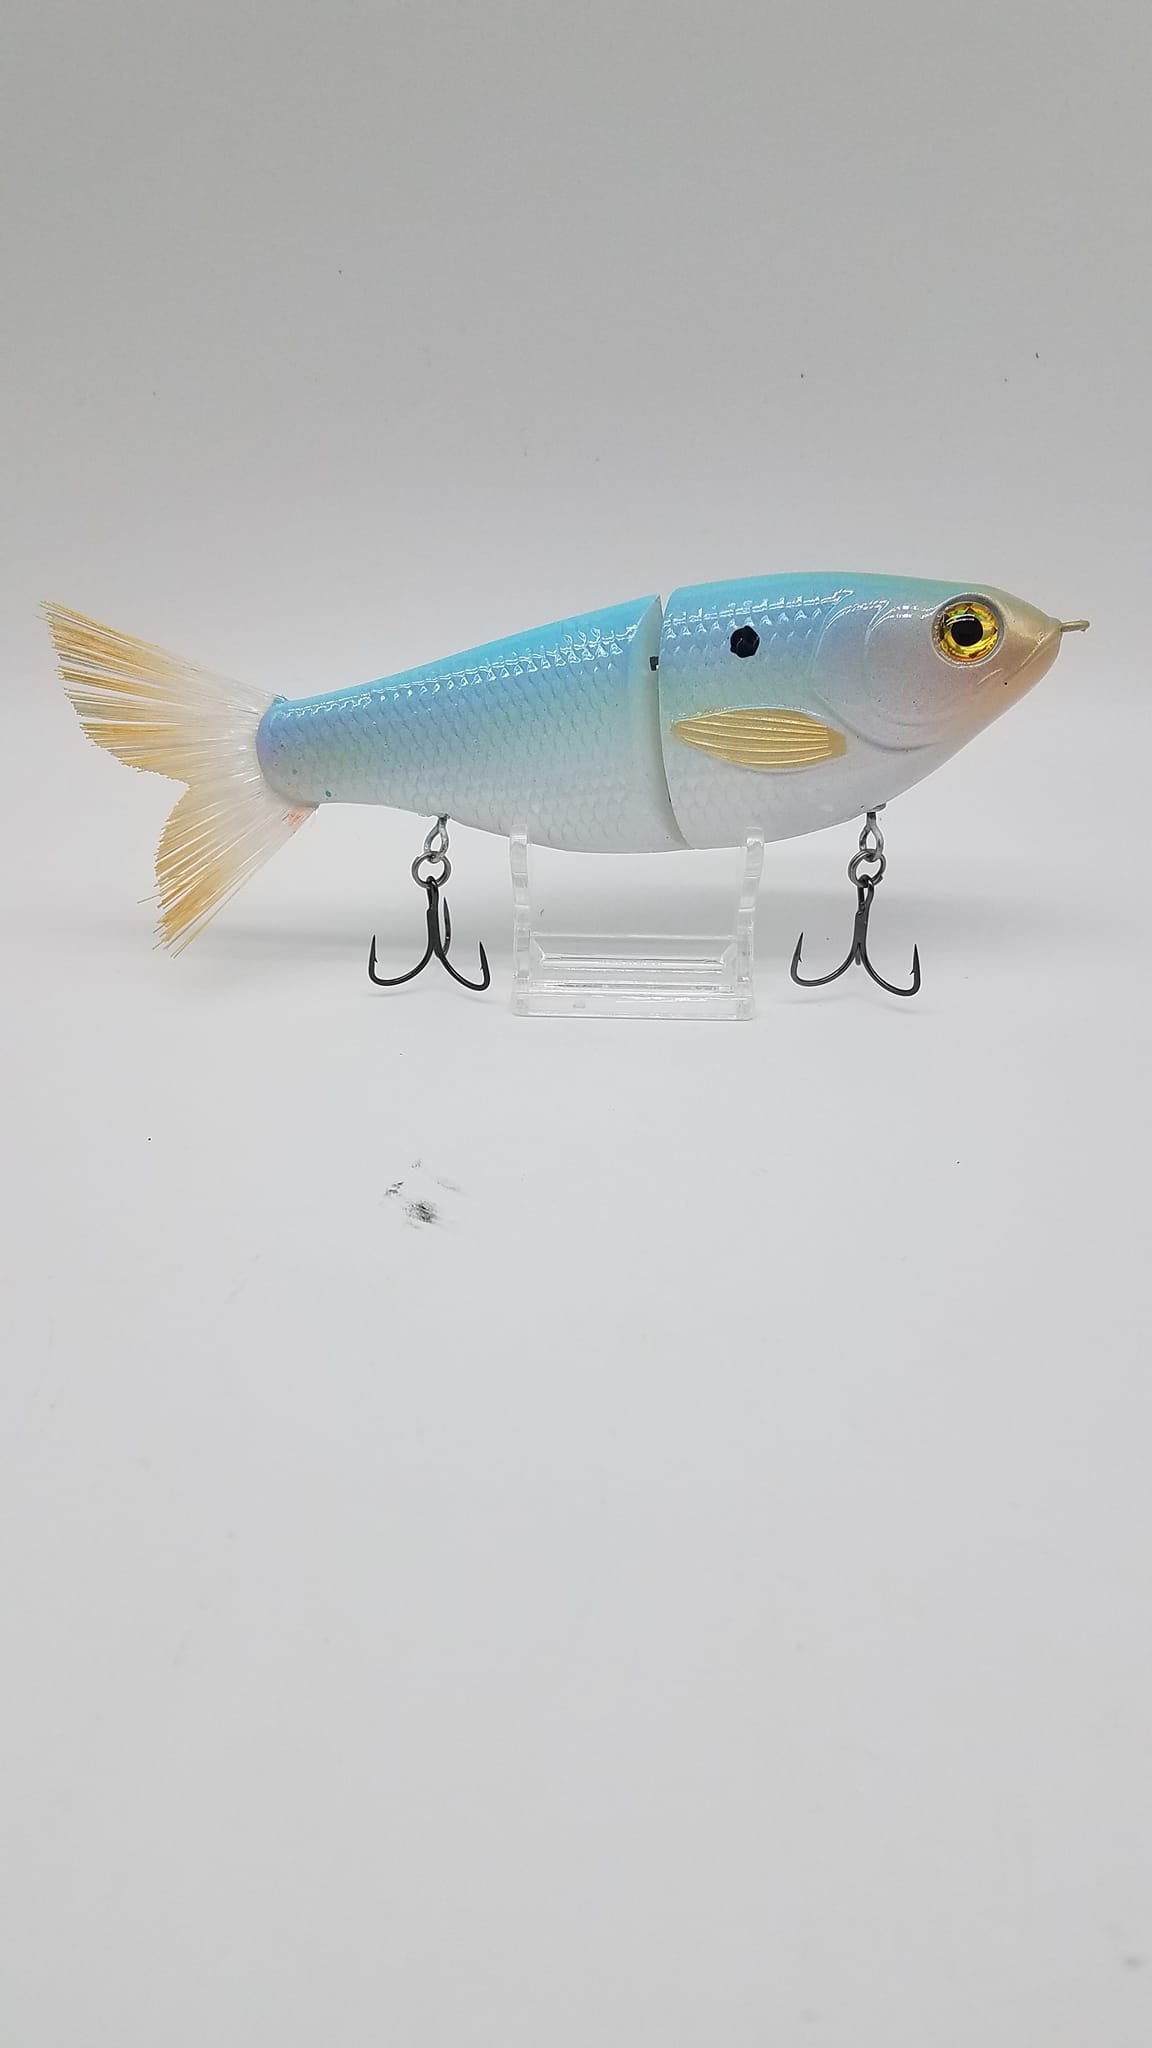 7" 2.5 Oz Glide Moderate Sinking With Rattles